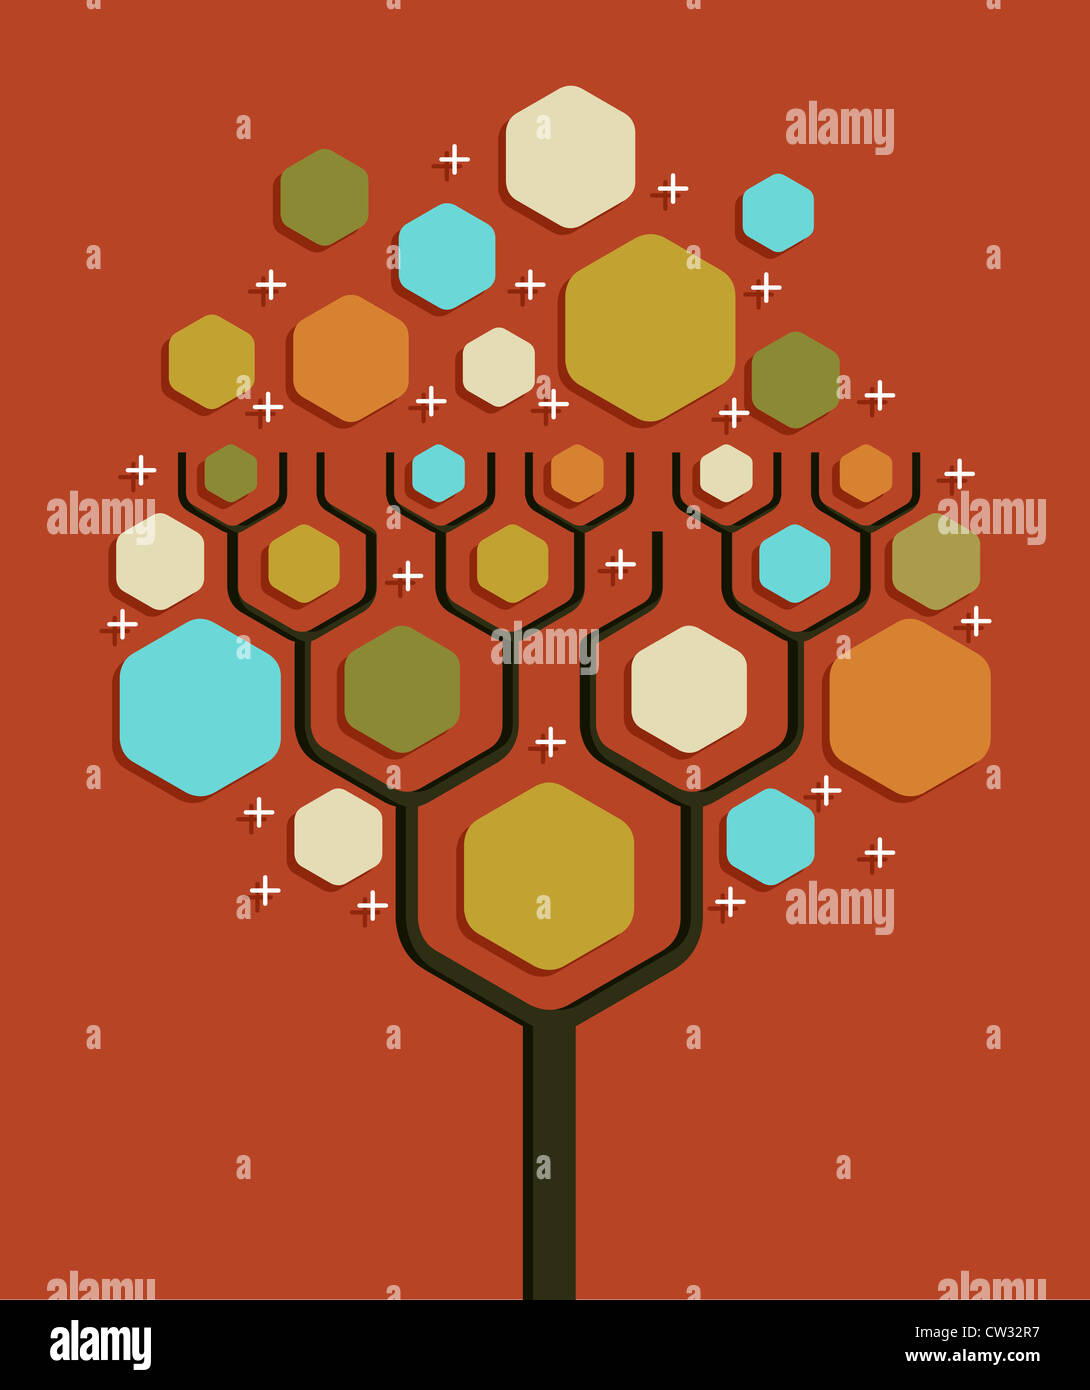 Social network tree business blank diagram layout. Vector illustration layered for easy manipulation and custom coloring. Stock Photo